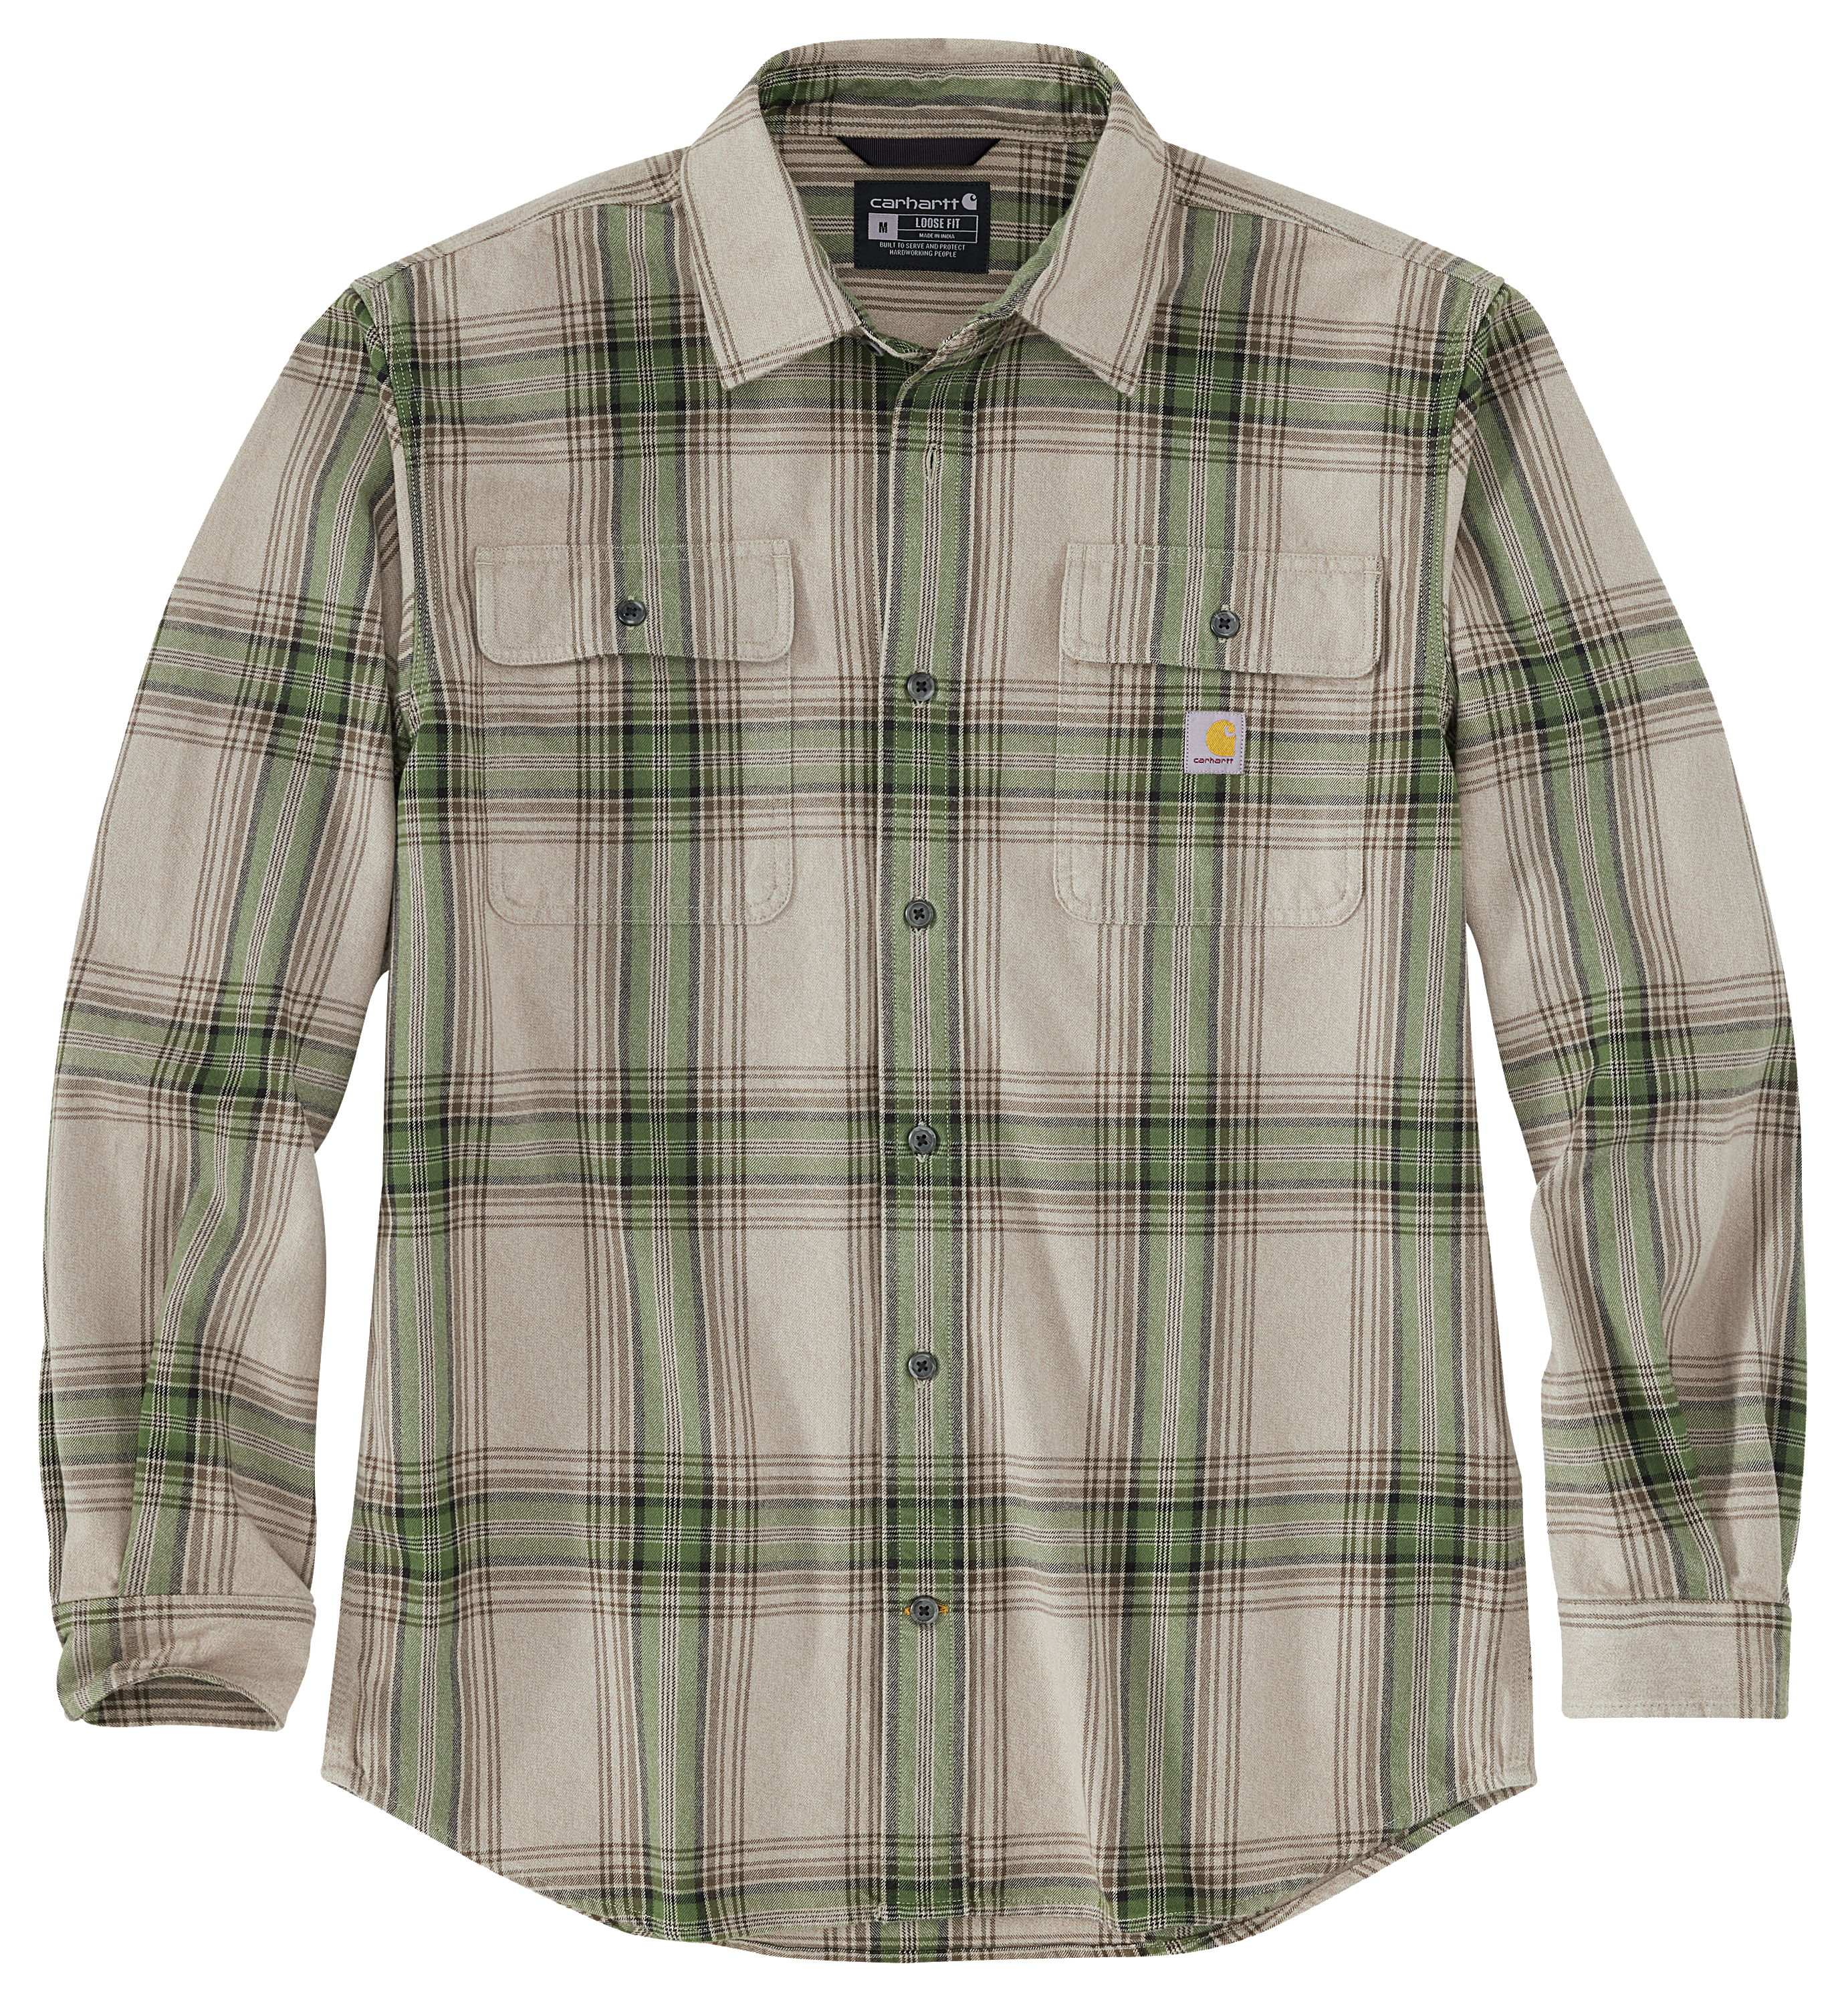 Carhartt Loose-Fit Heavyweight Flannel Plaid Long-Sleeve Button-Down Shirt for Men - Chive - M